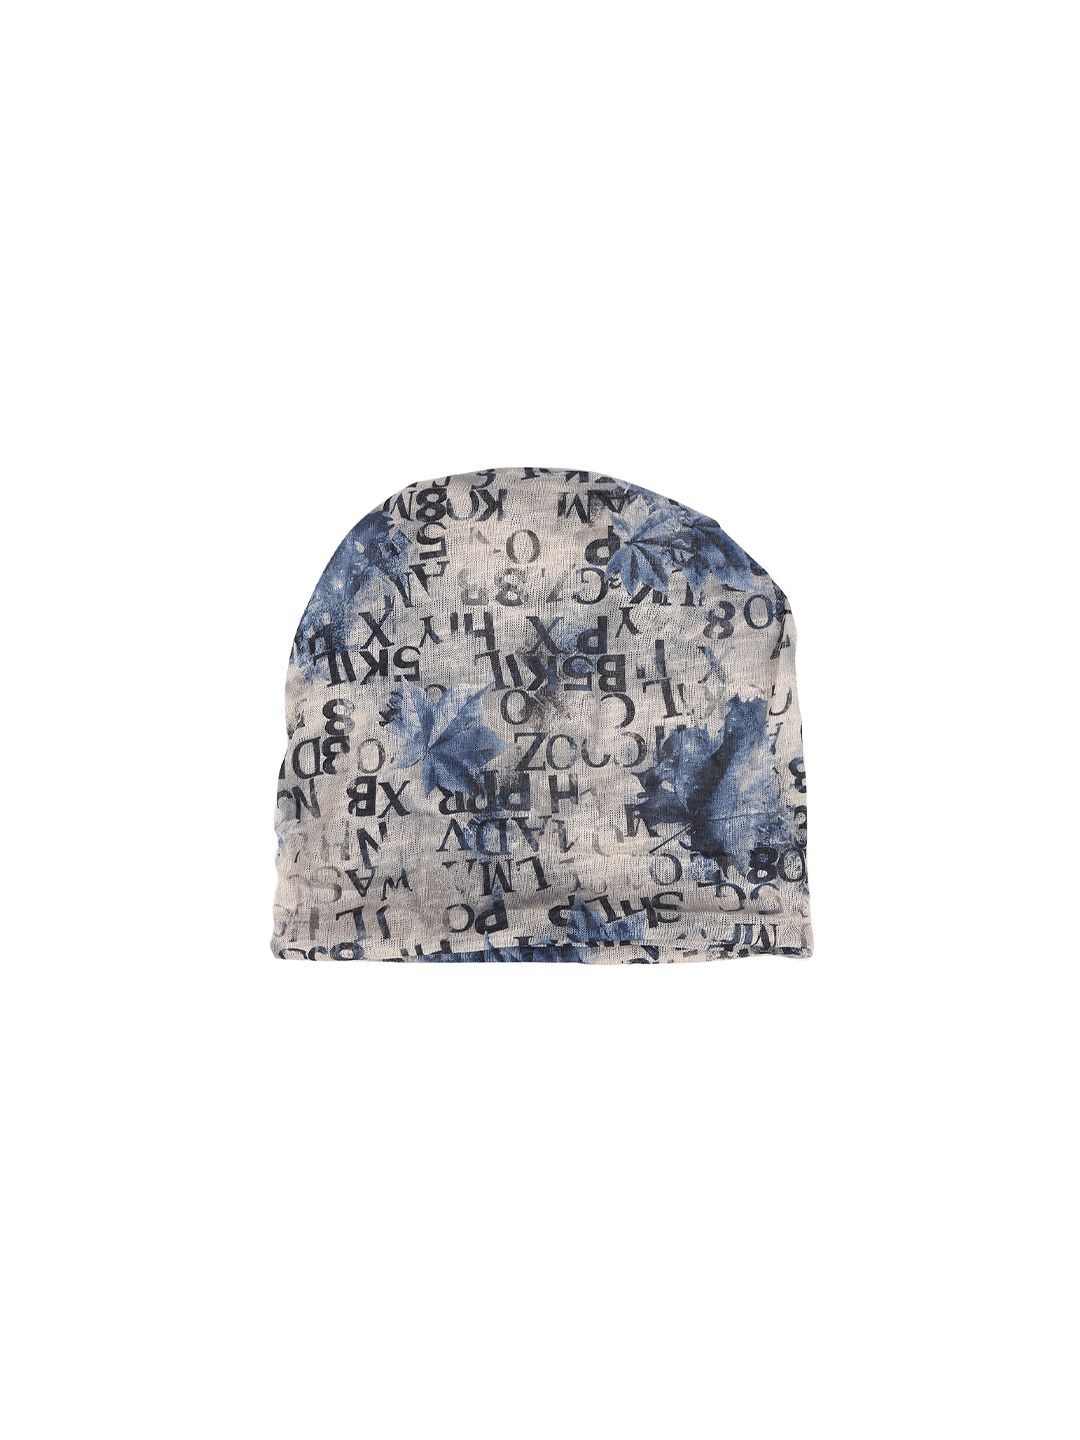 iSWEVEN Unisex White & Black Cotton Printed Beanie Price in India